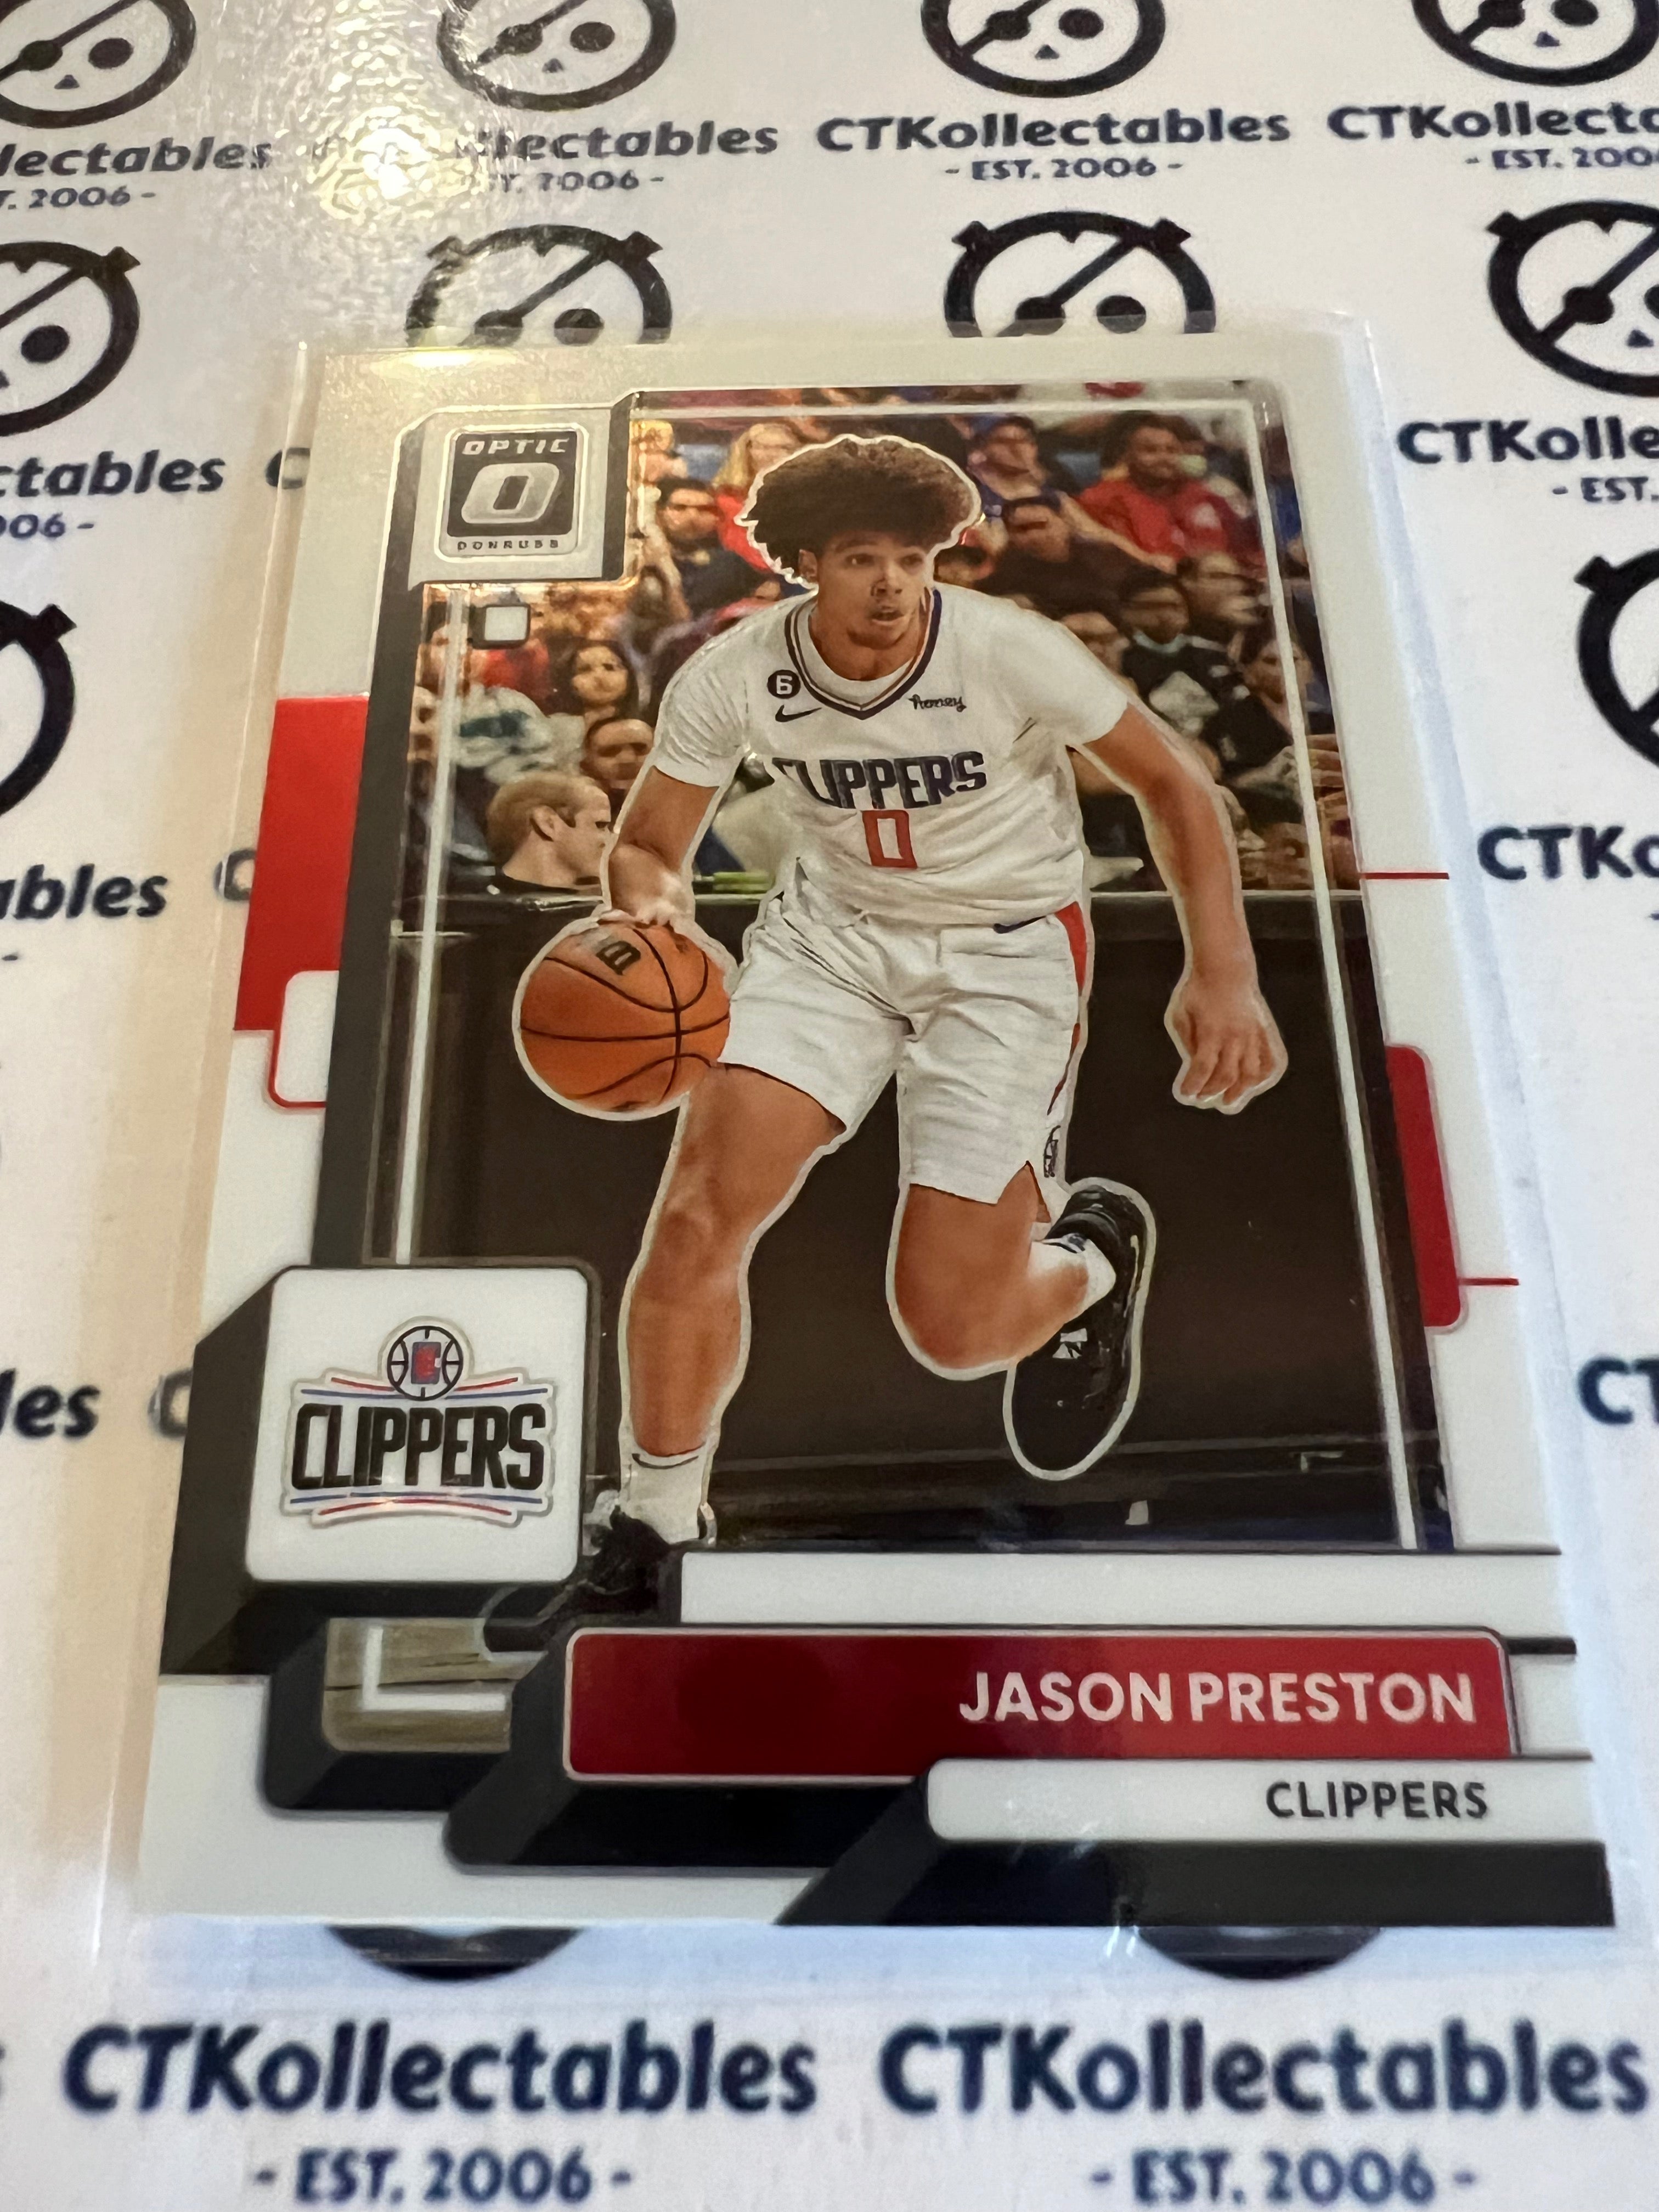 Los Angeles Clippers – CTKollectables